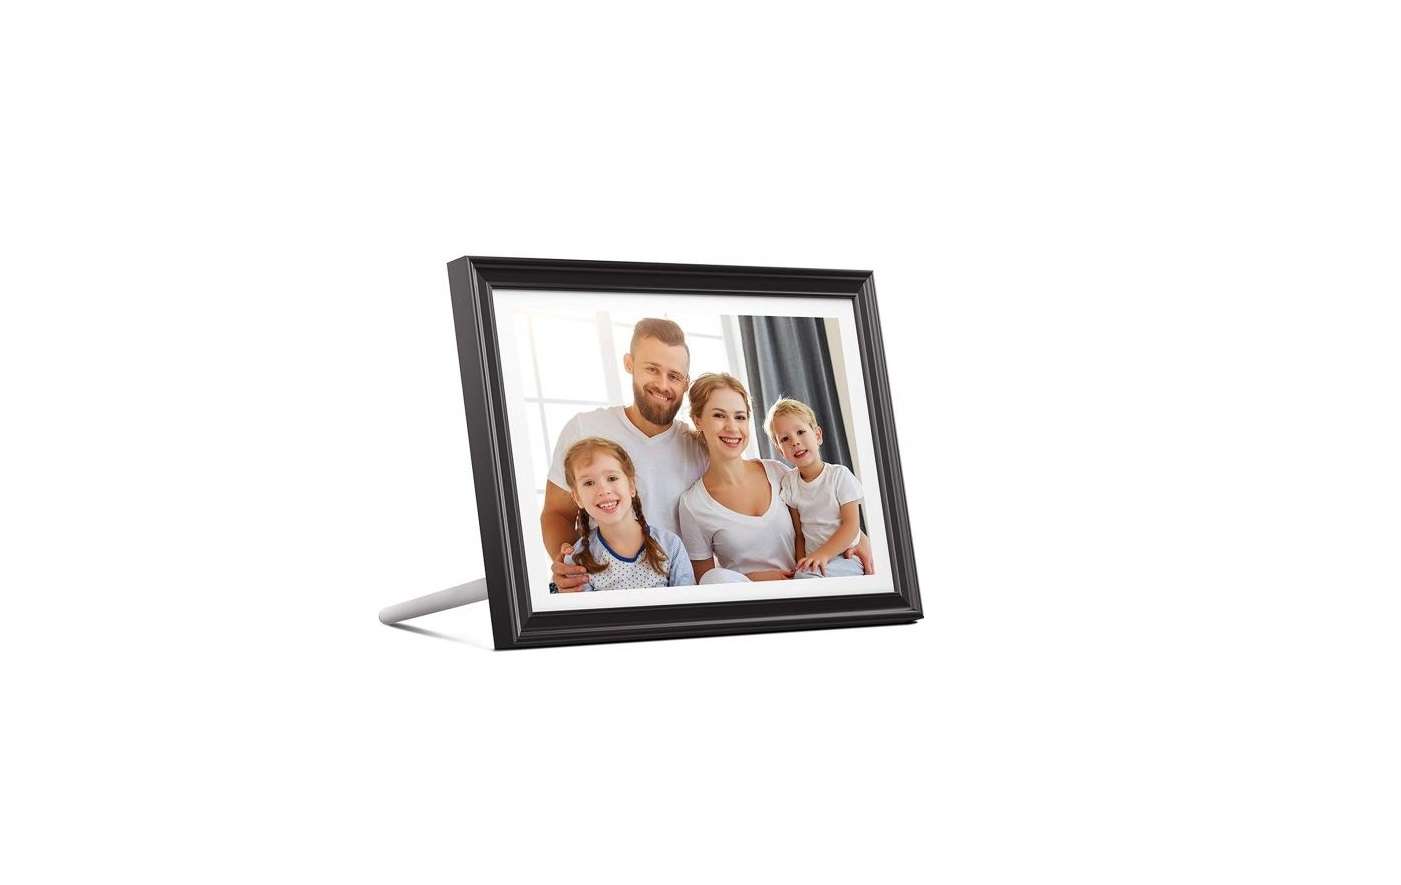 Dragon Touch Classic 15 Digital Picture Frame User Manual